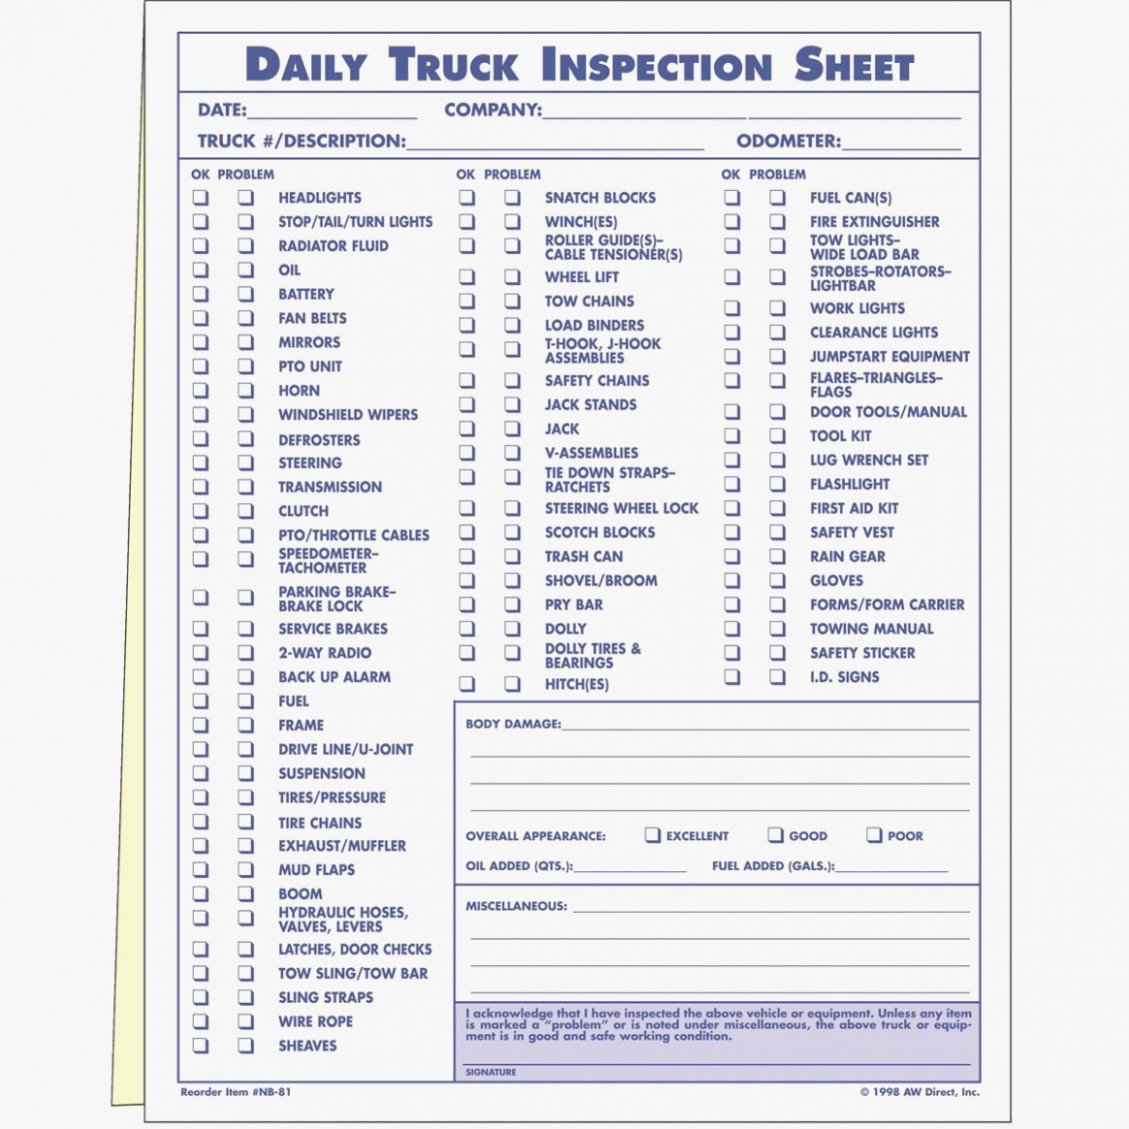 Vehicle Inspection Sheet Template Best Of Vehicle Inspection Sheet Template Invoice Car Word Free